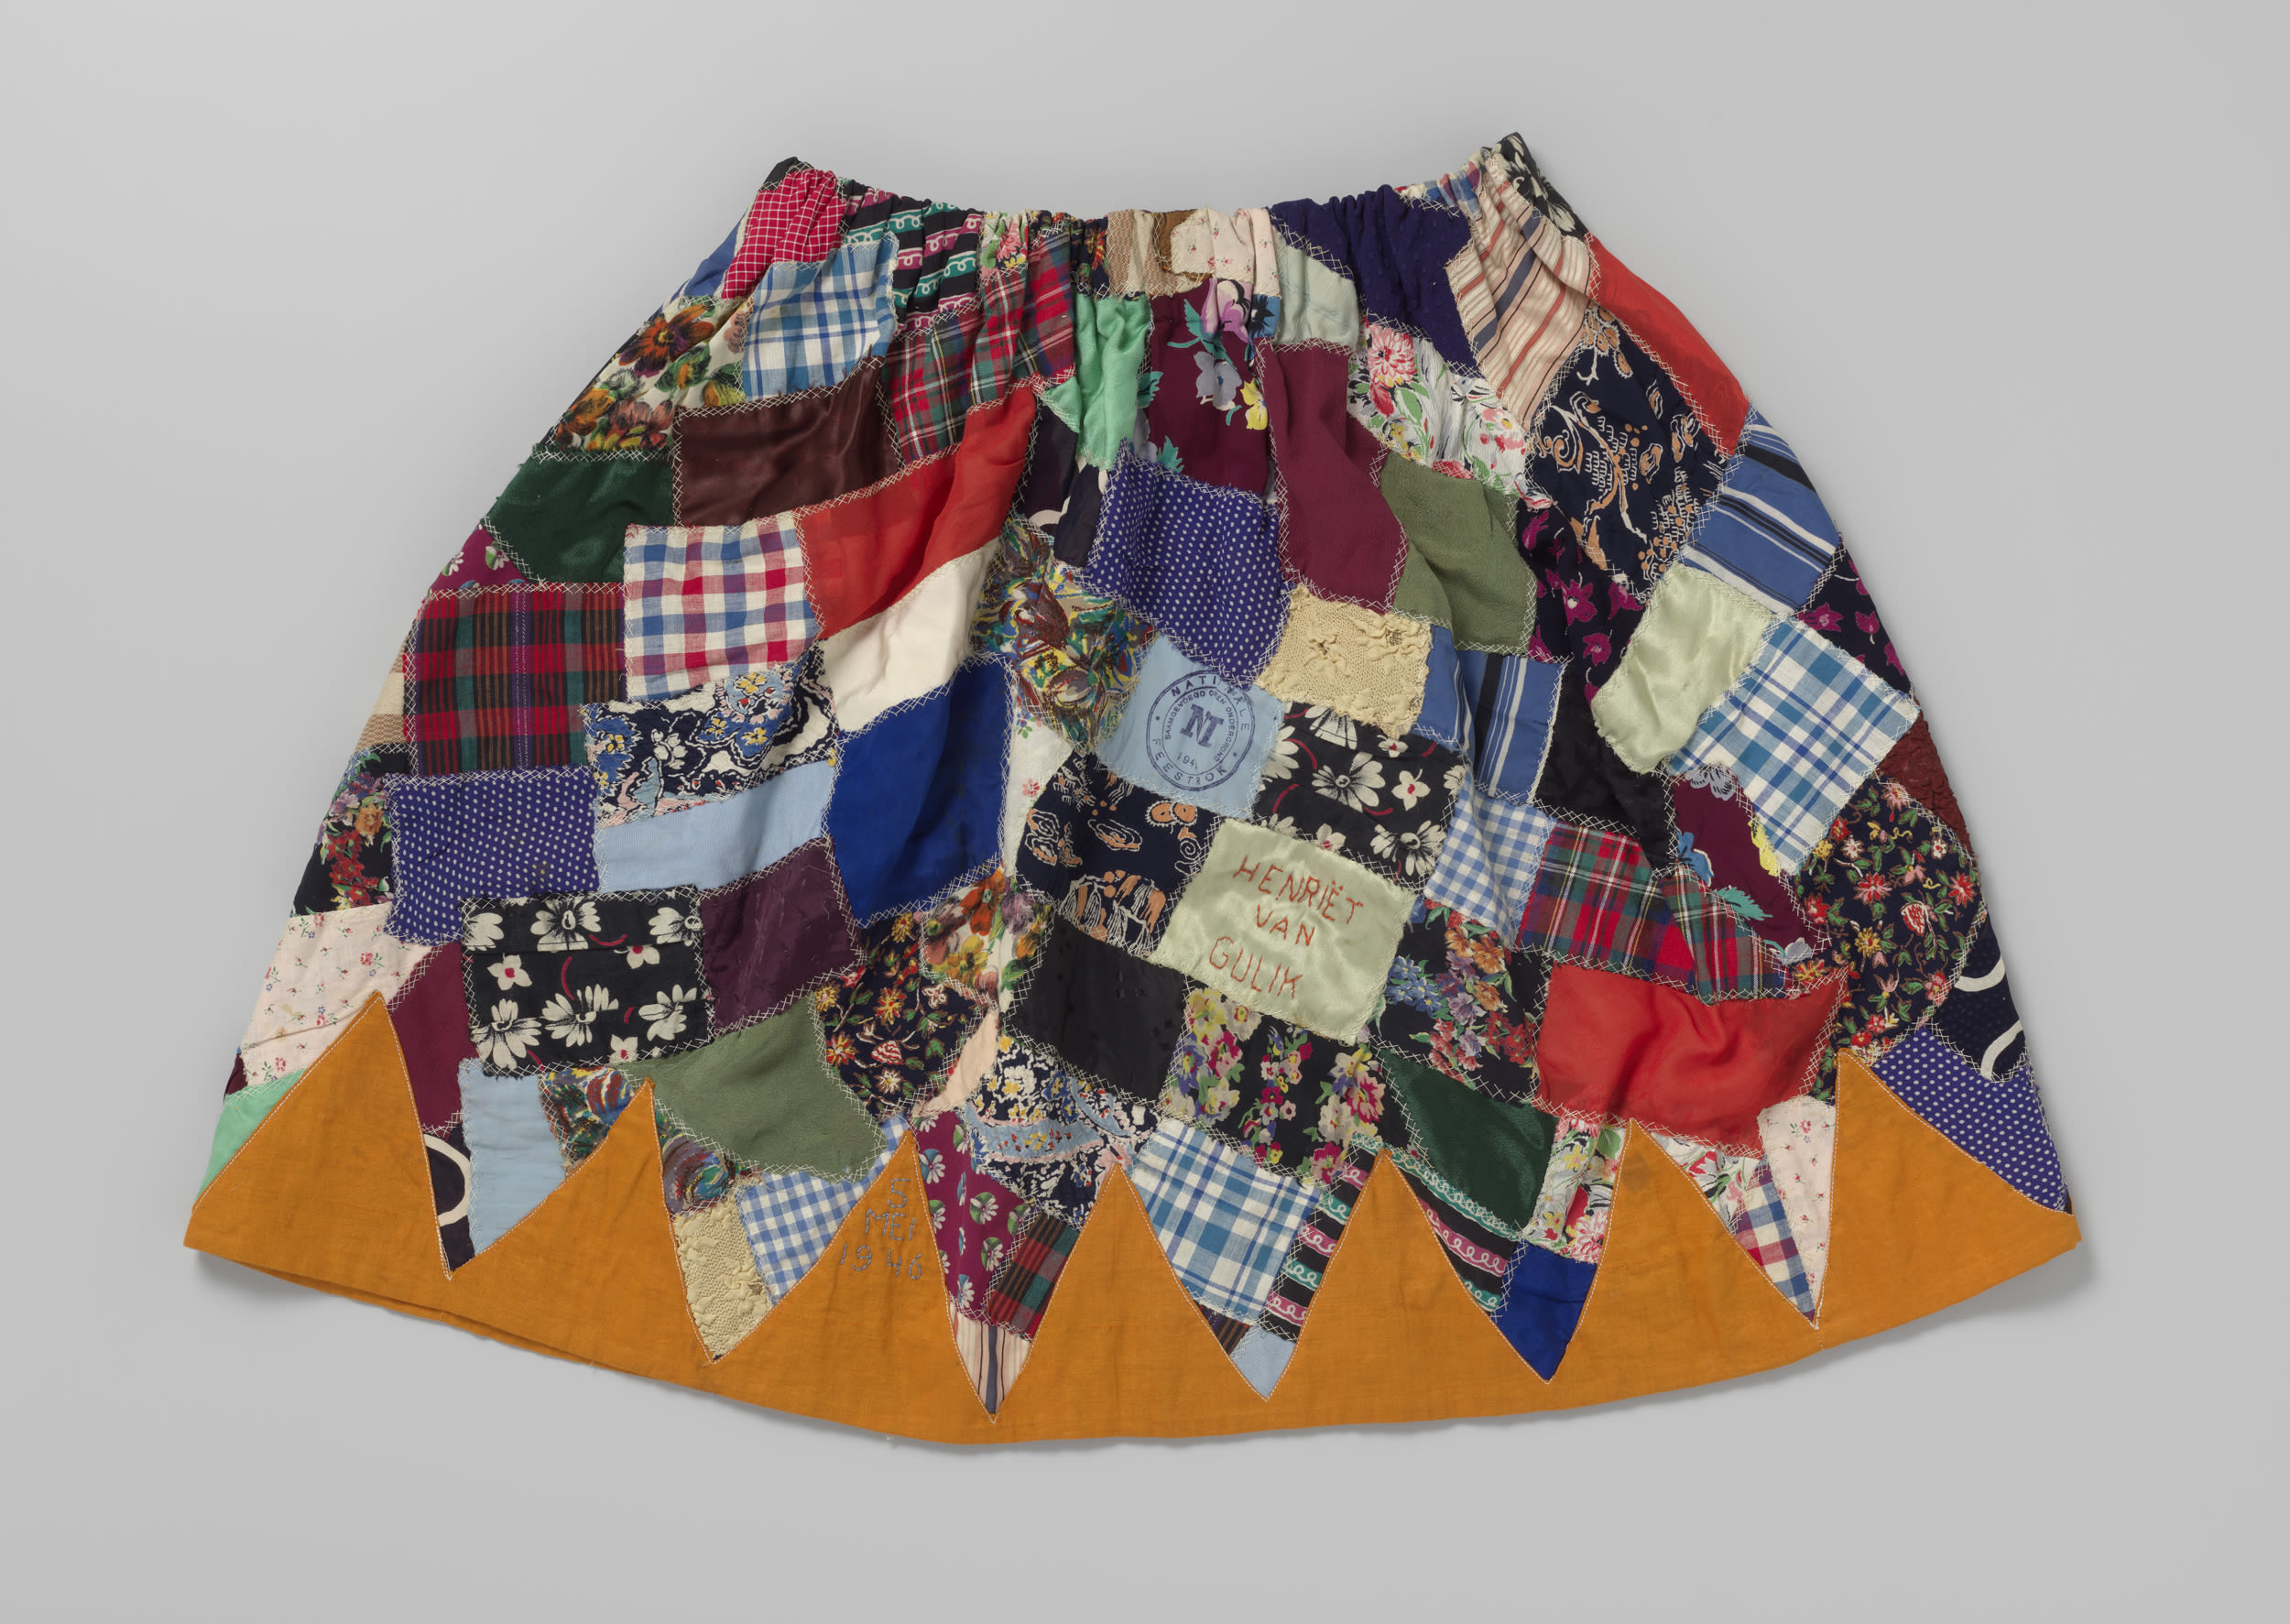 Colourful skirt composed of numerous patches of fabric embroidered with '19 Dec. 1935', '16 April 1945', 'Henrietta van Gulik' and stamped 'National Party Skirt..., 1947'